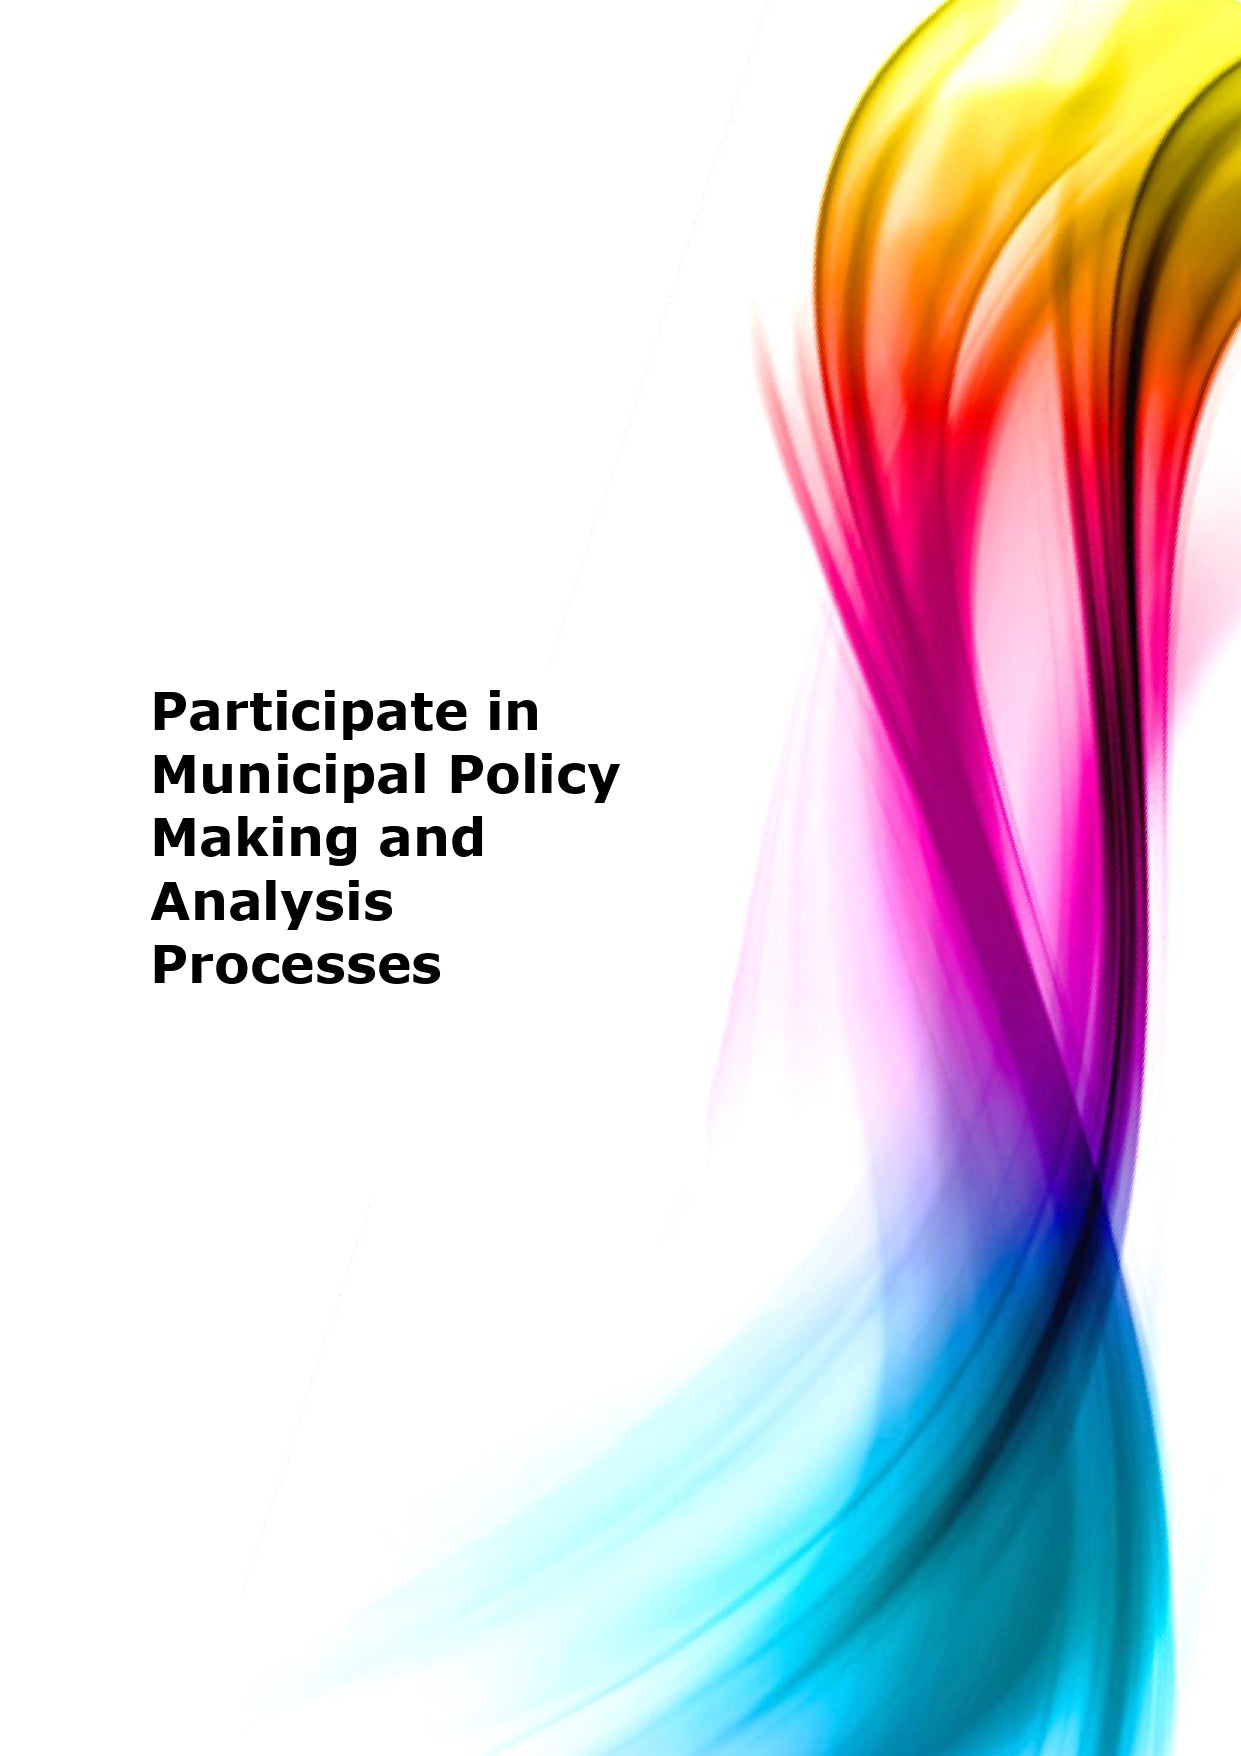 Participate in municipal policy making and analysis processes